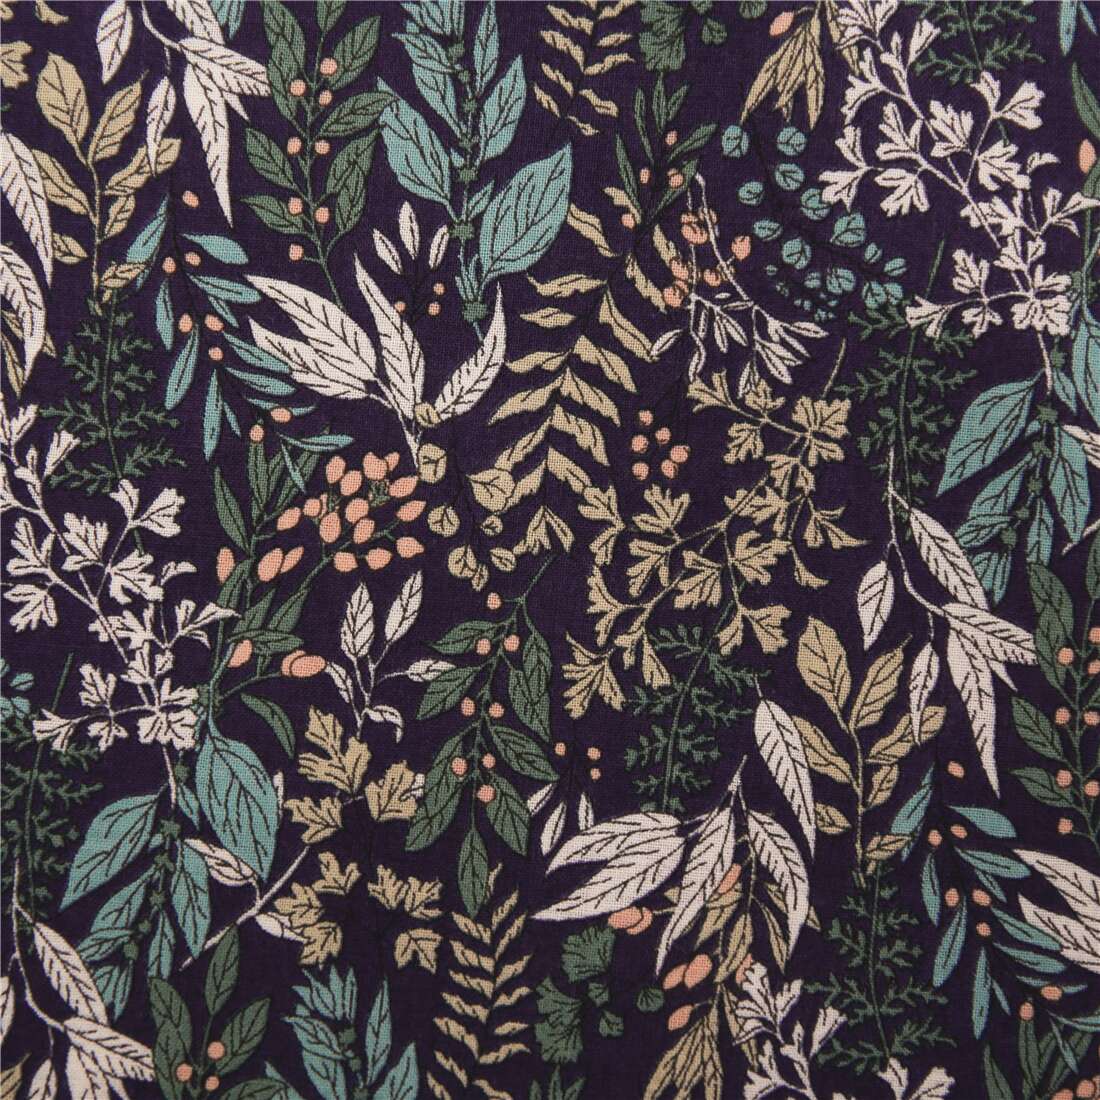 navy blue green white leaves pink flowers Japanese cotton lawn fabric ...